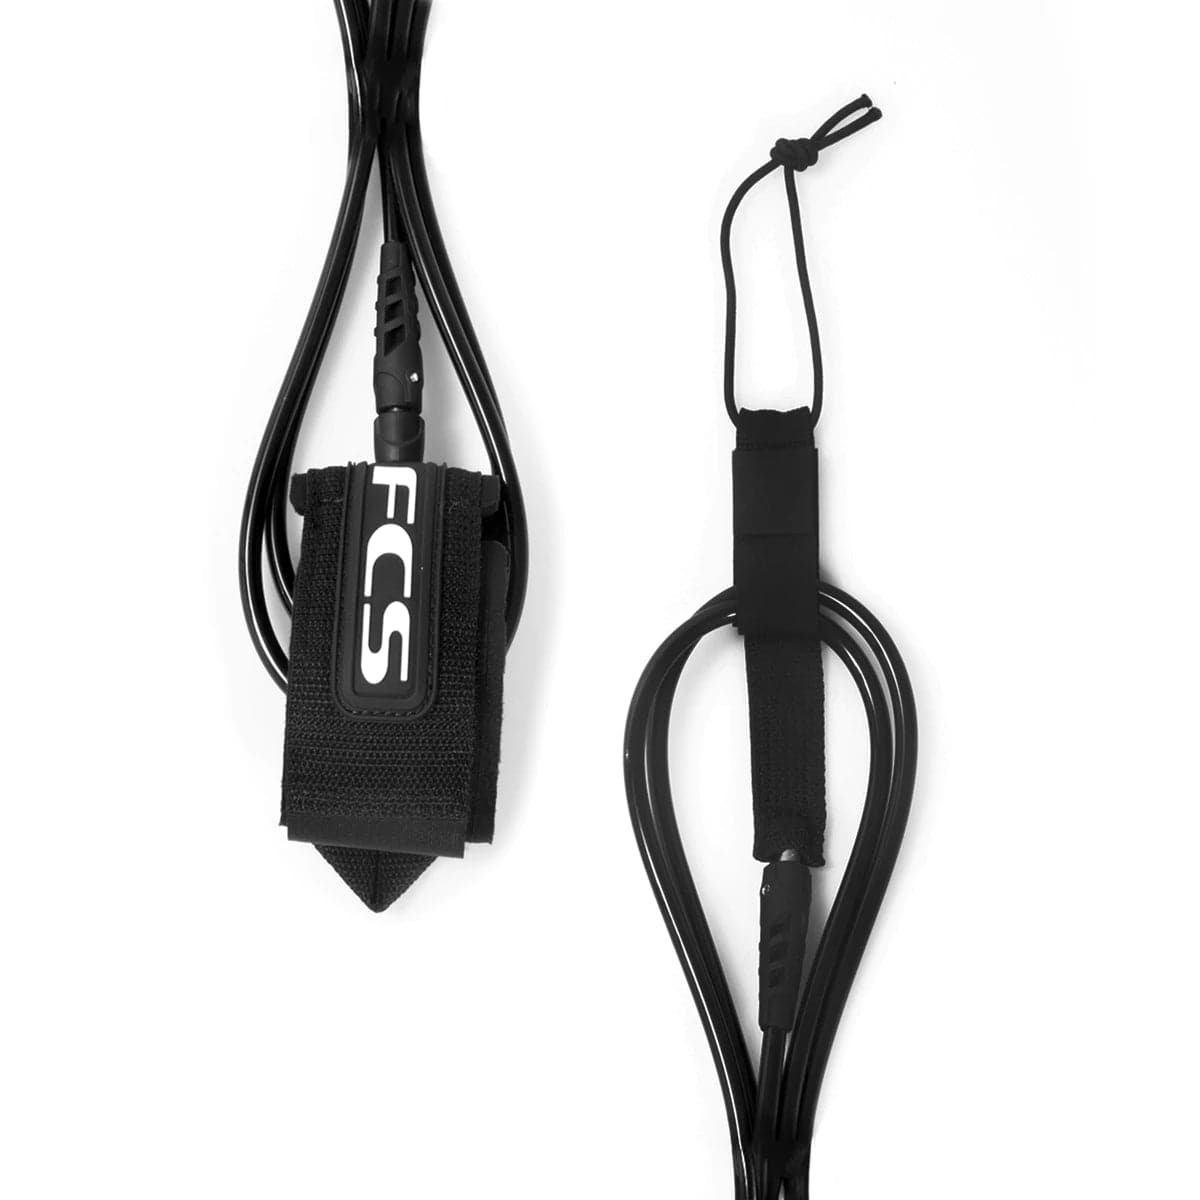 Featuring the 7' Straight Leash sup accessory, sup fin manufactured by FCS shown here from a second angle.